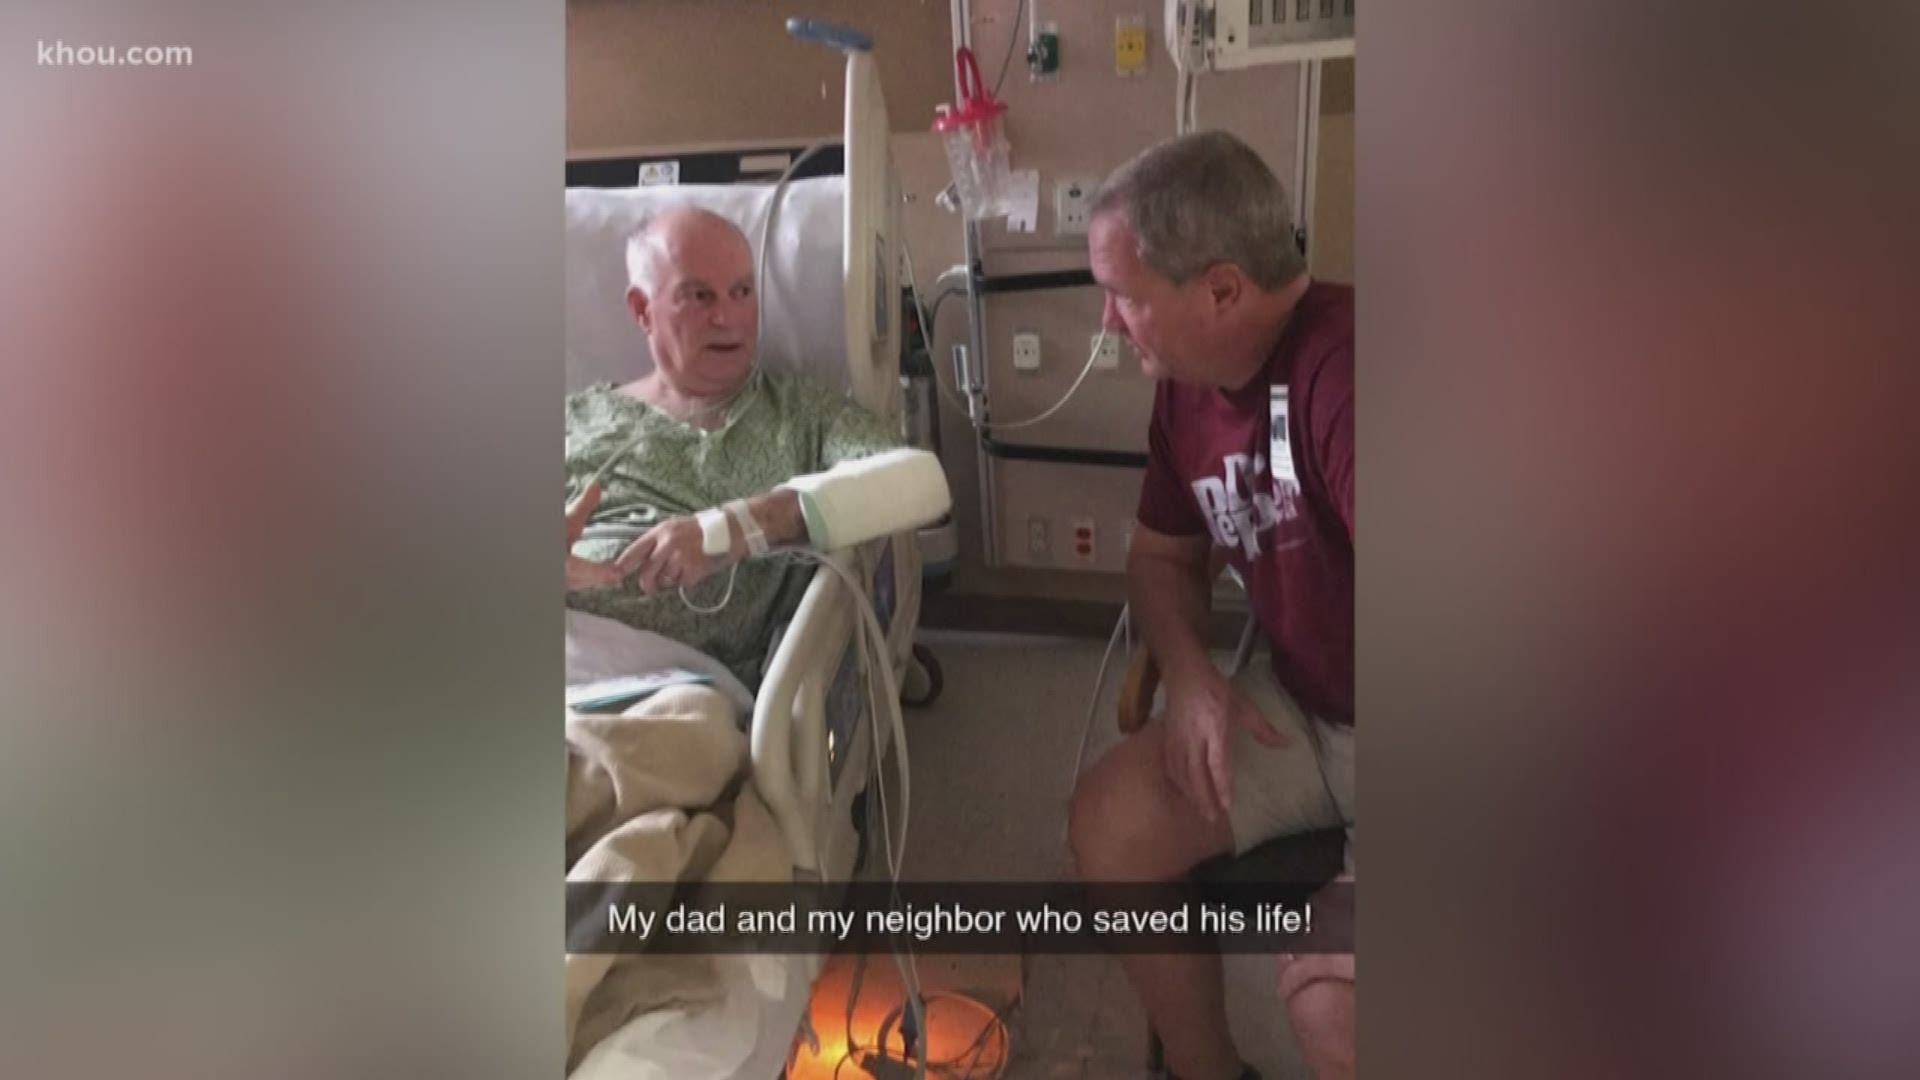 Home surveillance captured a paramedic save his neighbor's life after he collapsed and went into cardiac arrest.